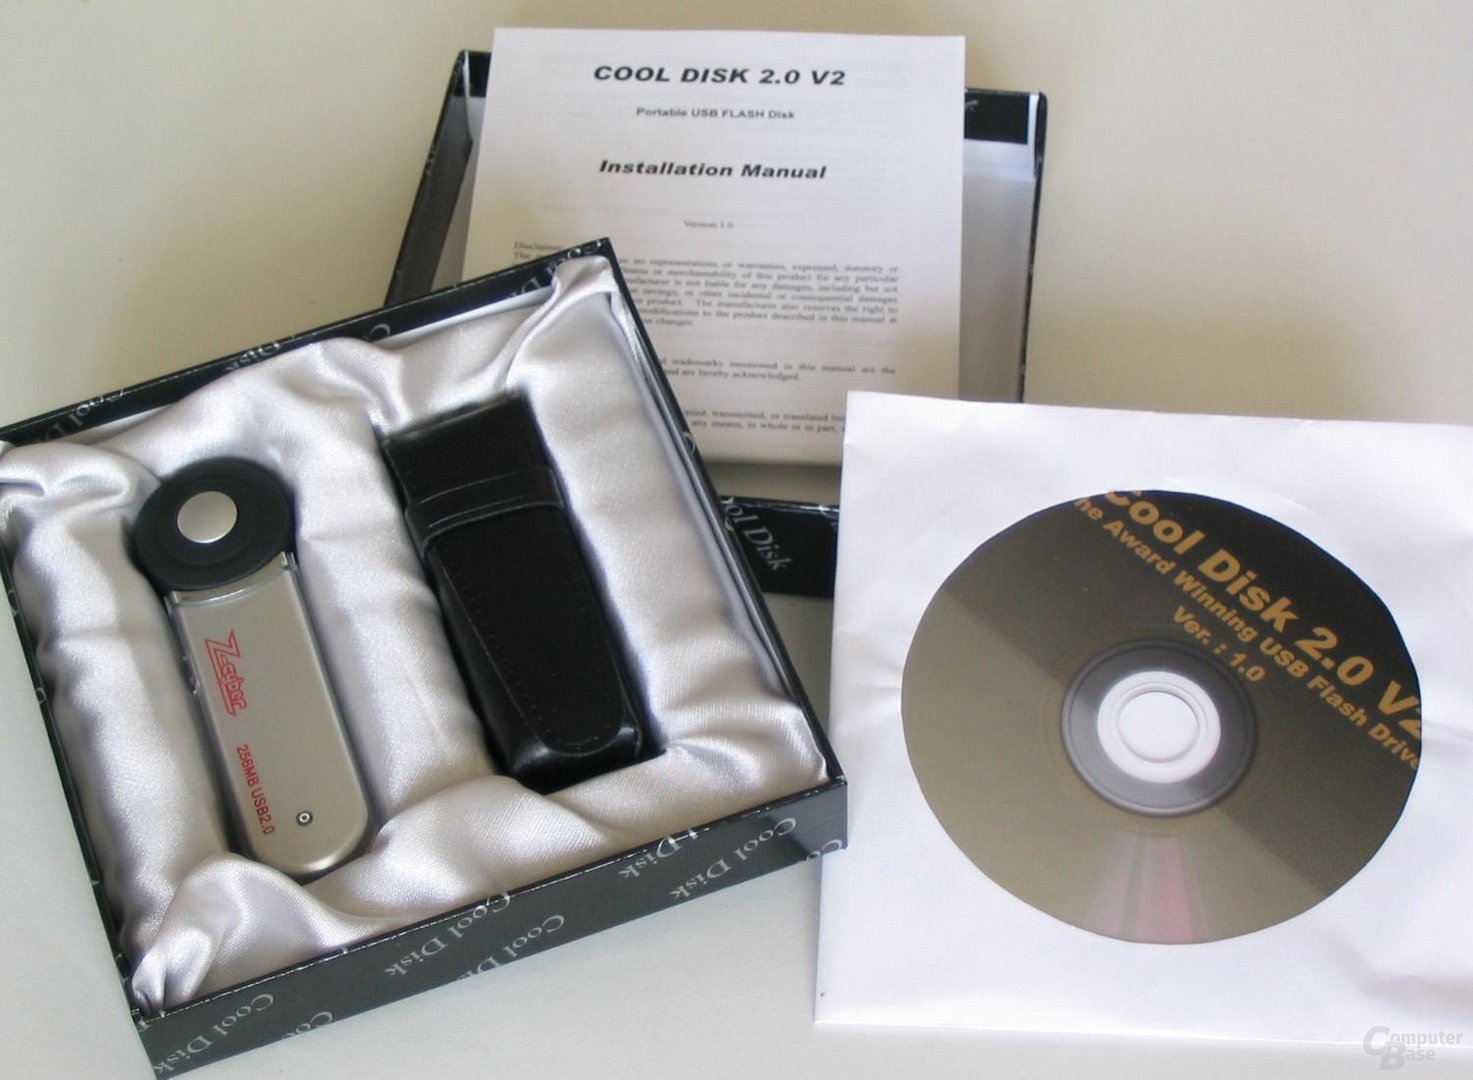 Z-Cyber Cool Disk 2.0 V2 in edler Verpackung - Lieferumfang